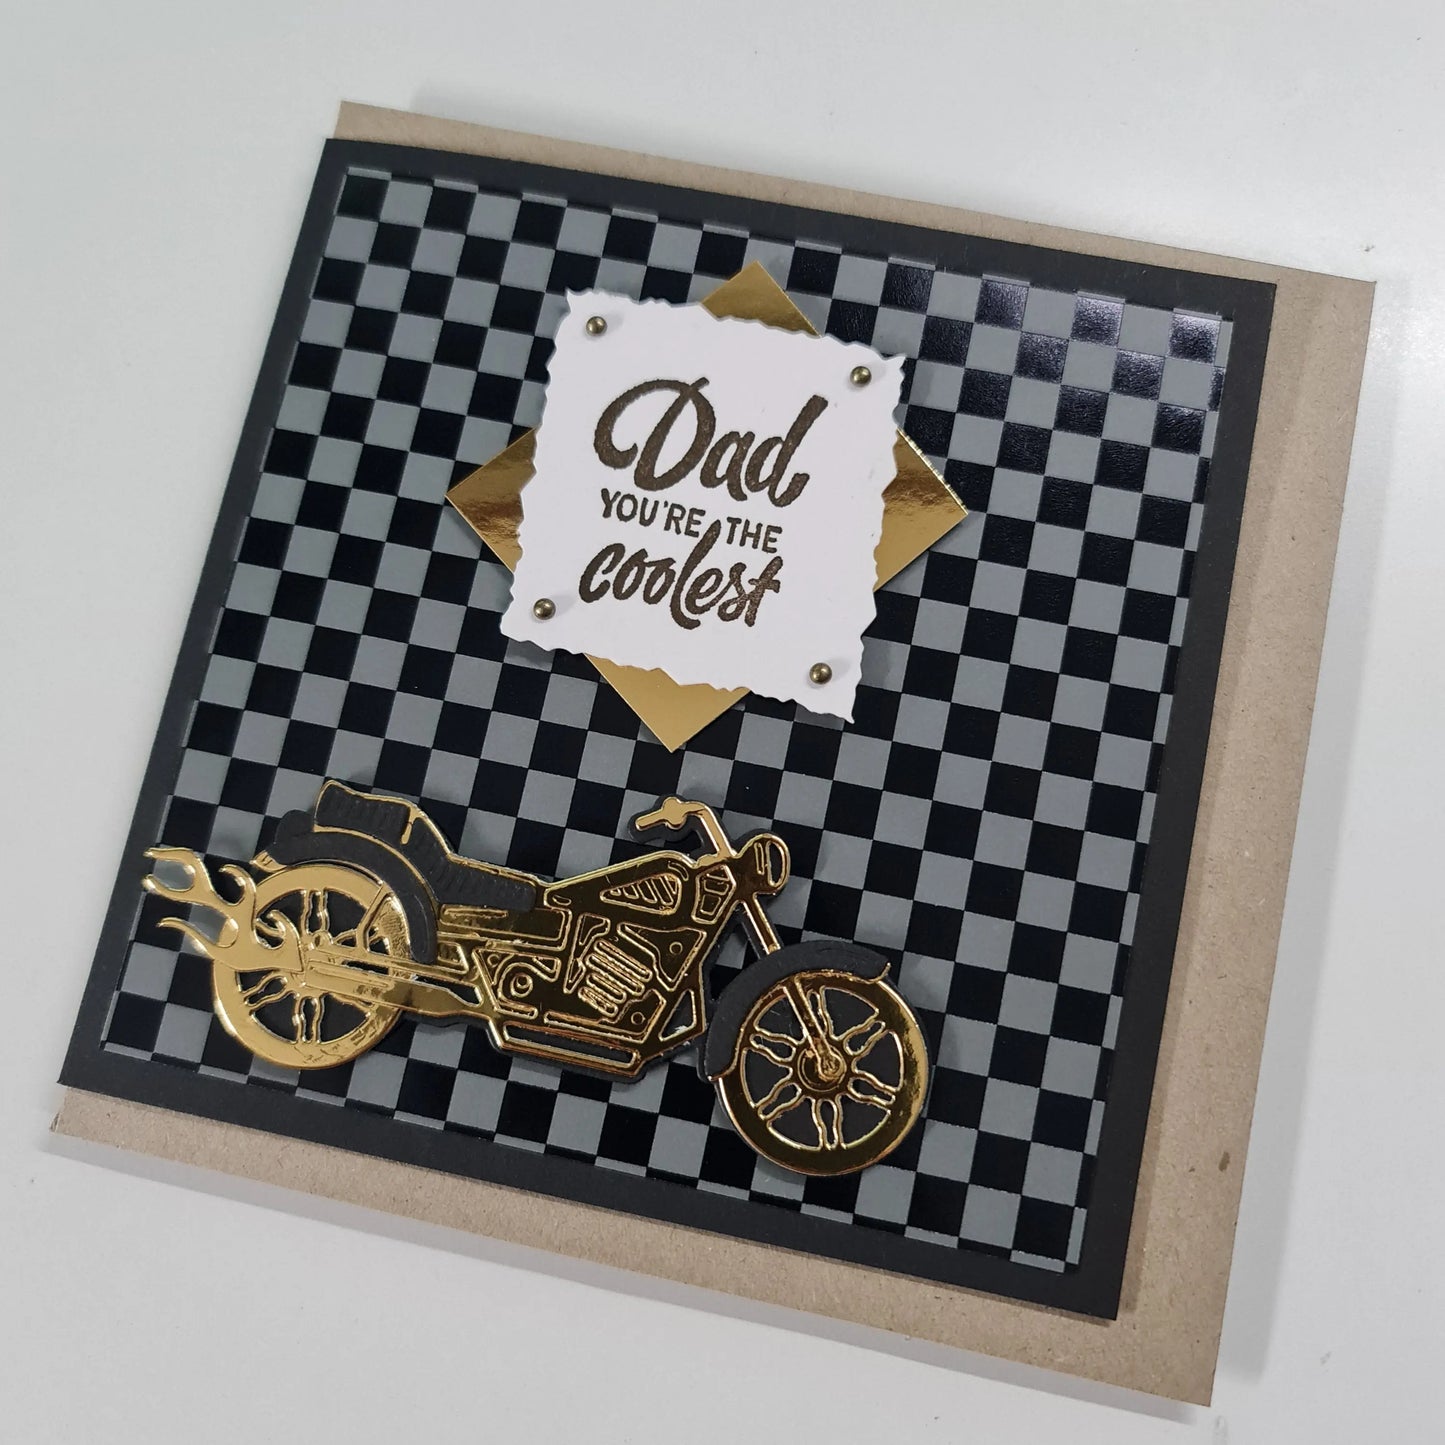 Motorbike Dad Cards Paper Love Cards